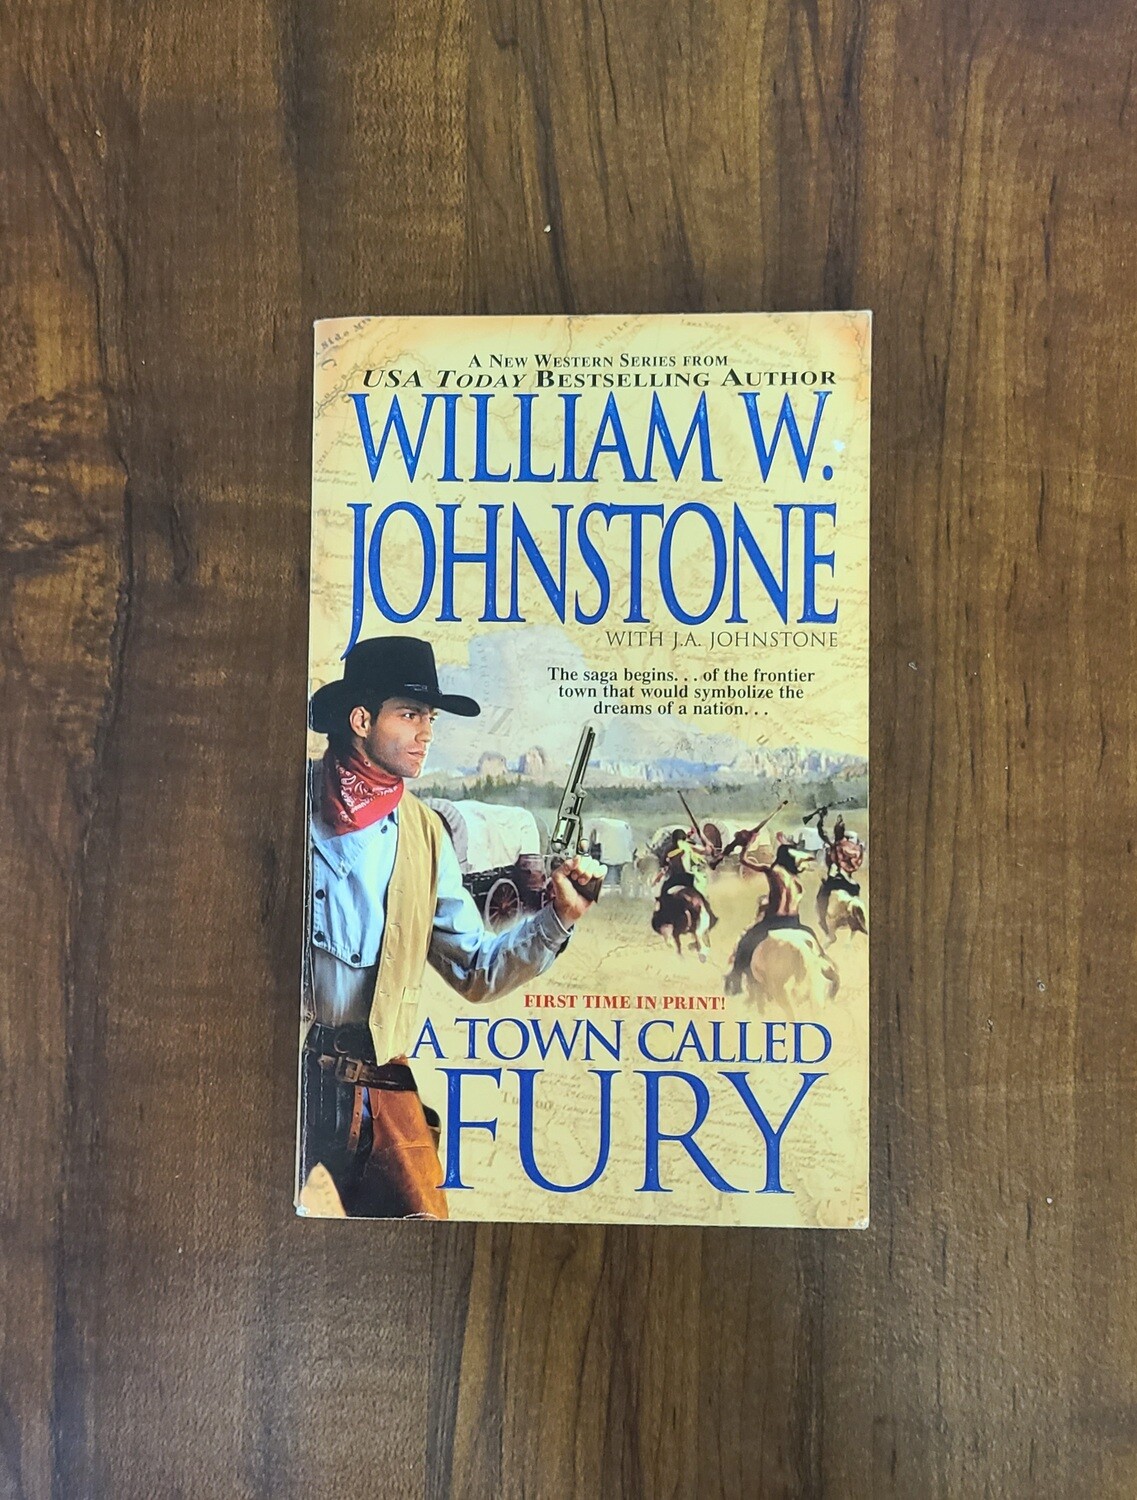 A Town Called Fury by William W. Johnstone with J.A. Johnstone